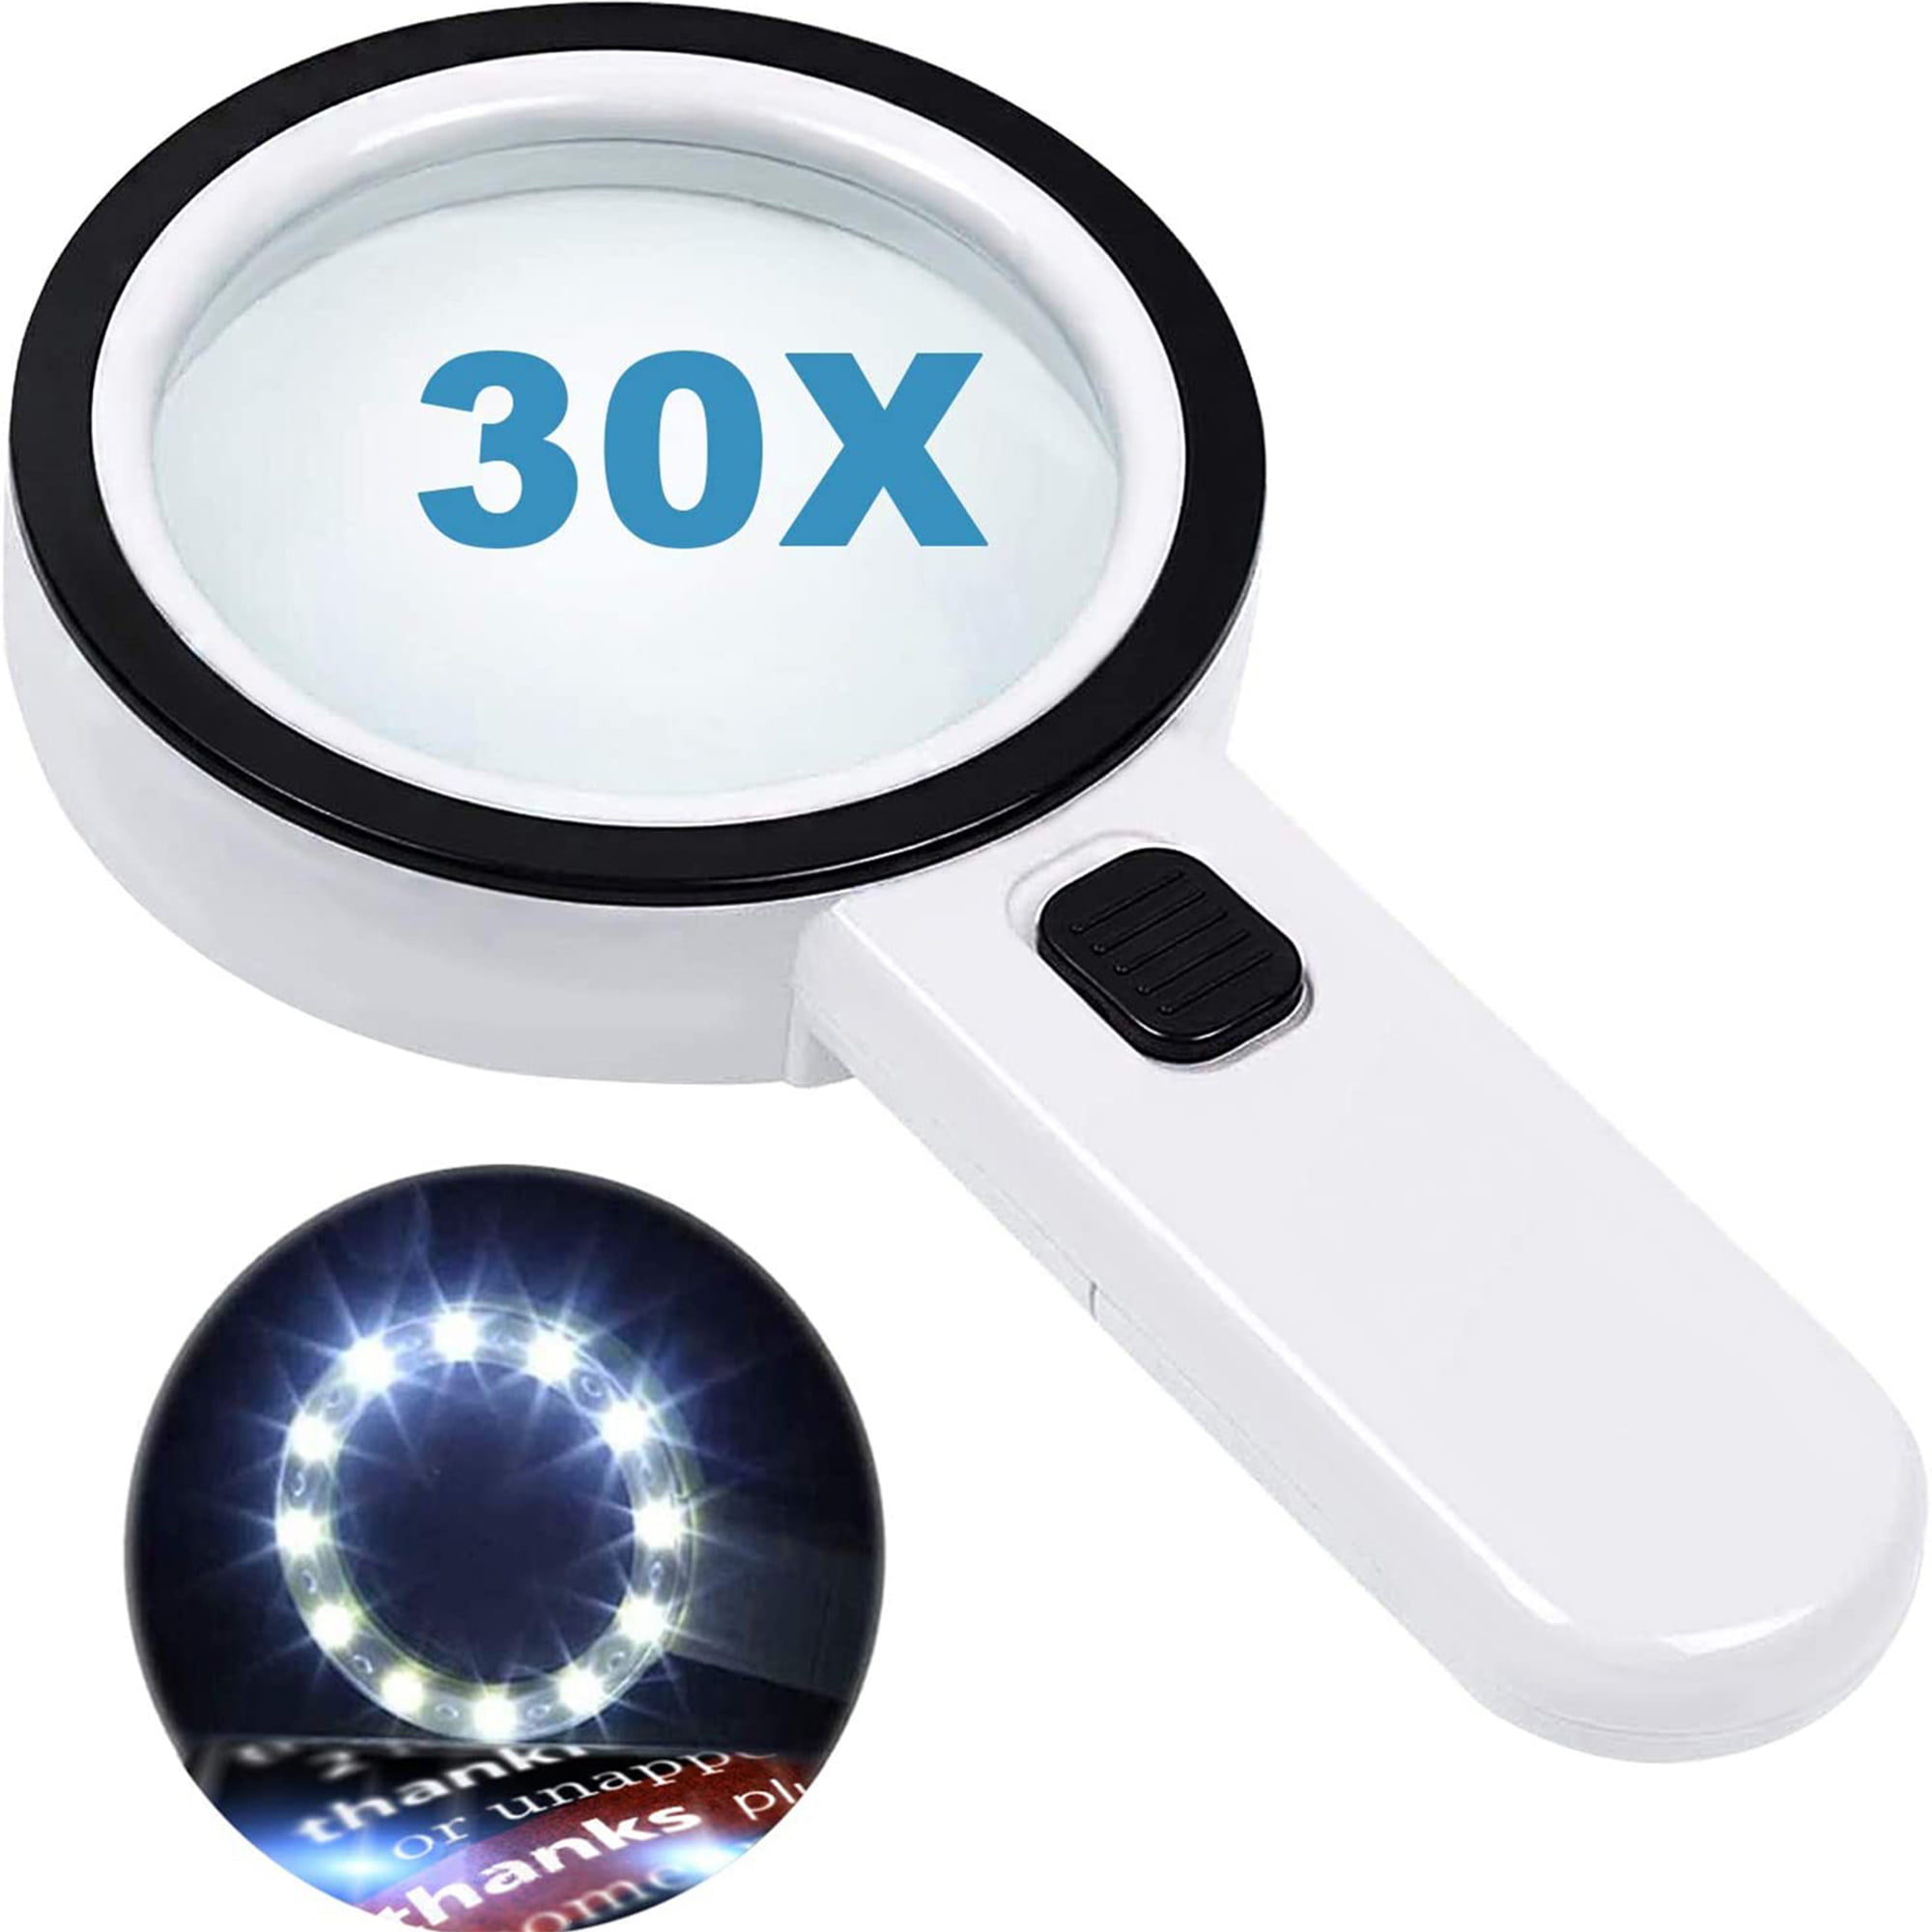 Extra Large K9 Lens Handsfree Macular Degeneration,Seniors Reading,Coins,Stamps Magnifying Glass With Light 5X Magnification Rechargeable LED Desktop Dome Magnifier Silicone Non-Slip Grip 